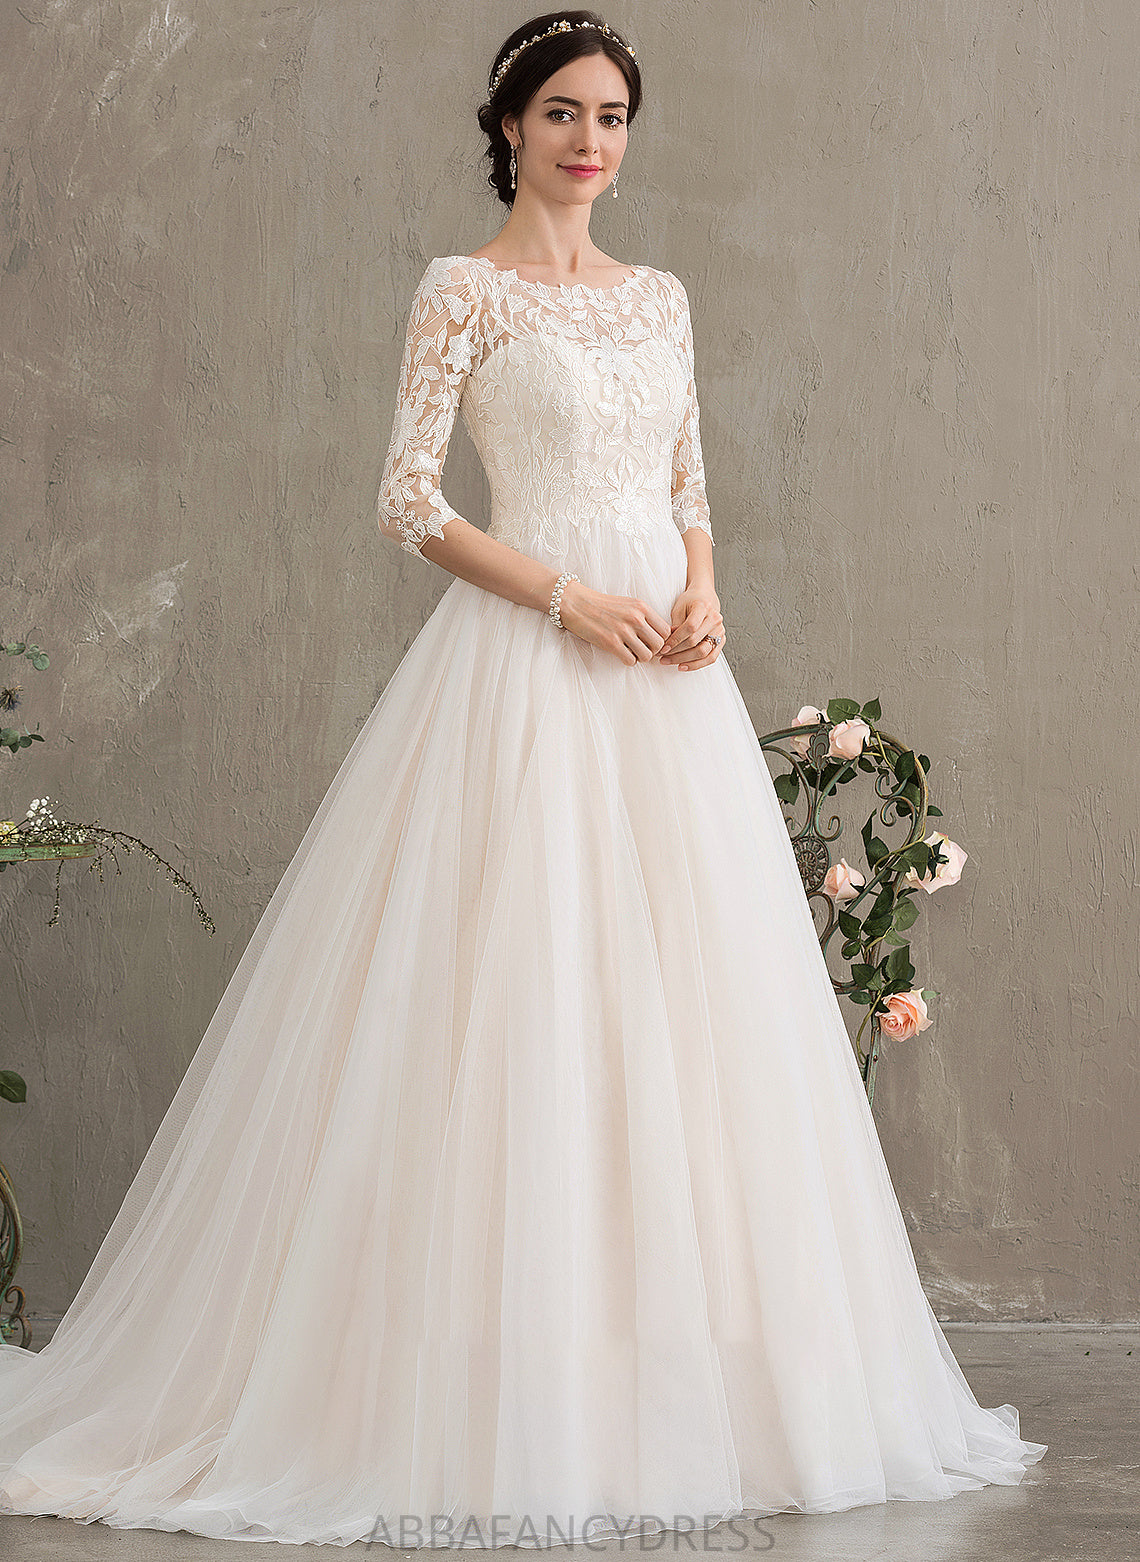 Wedding Raina With Court Tulle Dress Scoop Wedding Dresses Ball-Gown/Princess Train Neck Sequins